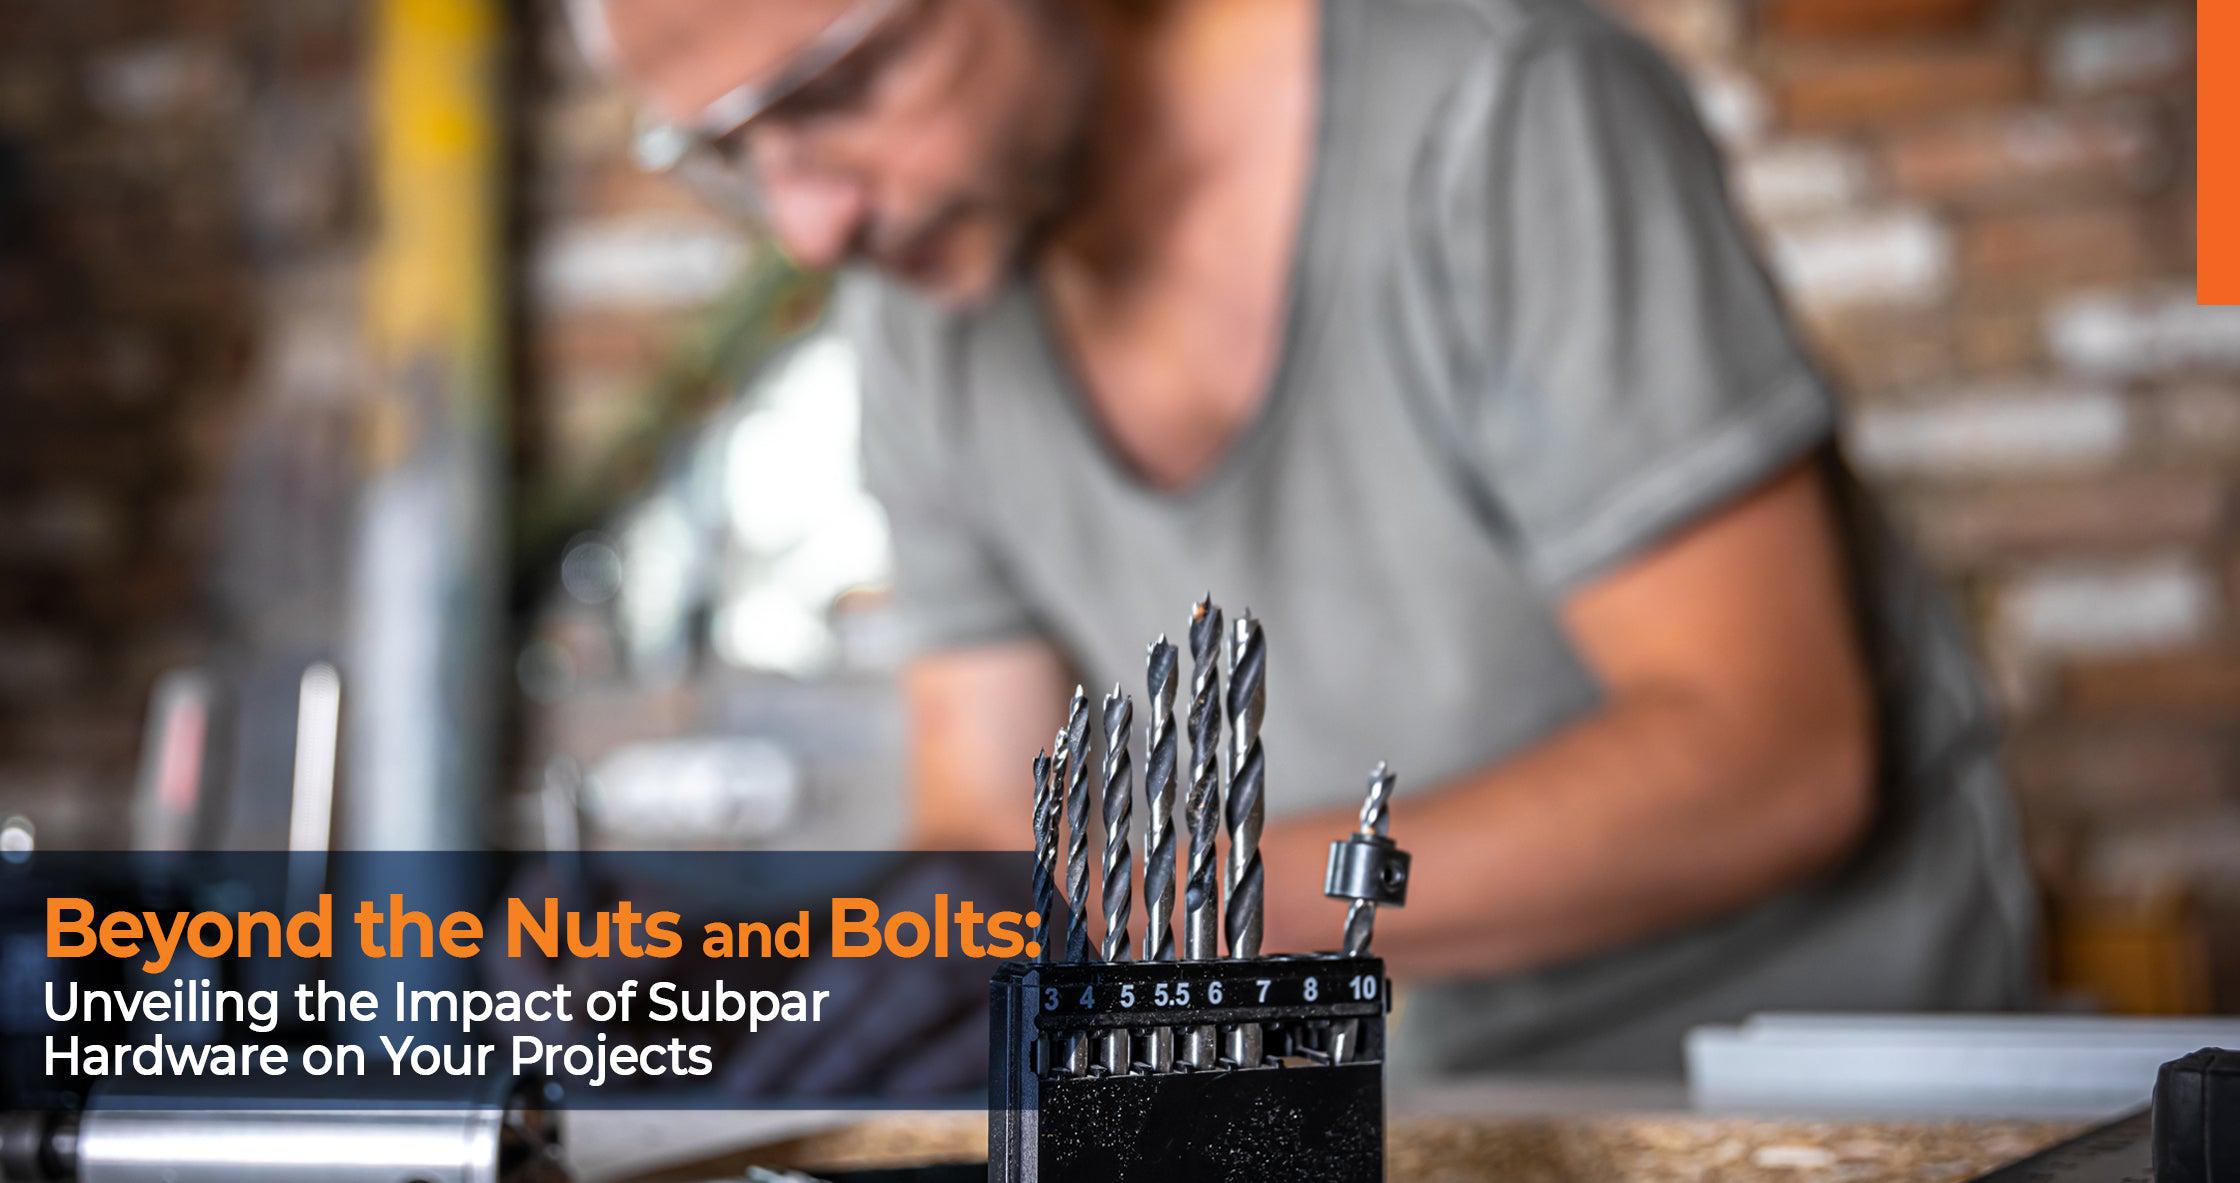 Beyond the Nuts and Bolts: Unveiling the Impact of Subpar Hardware on Your Projects